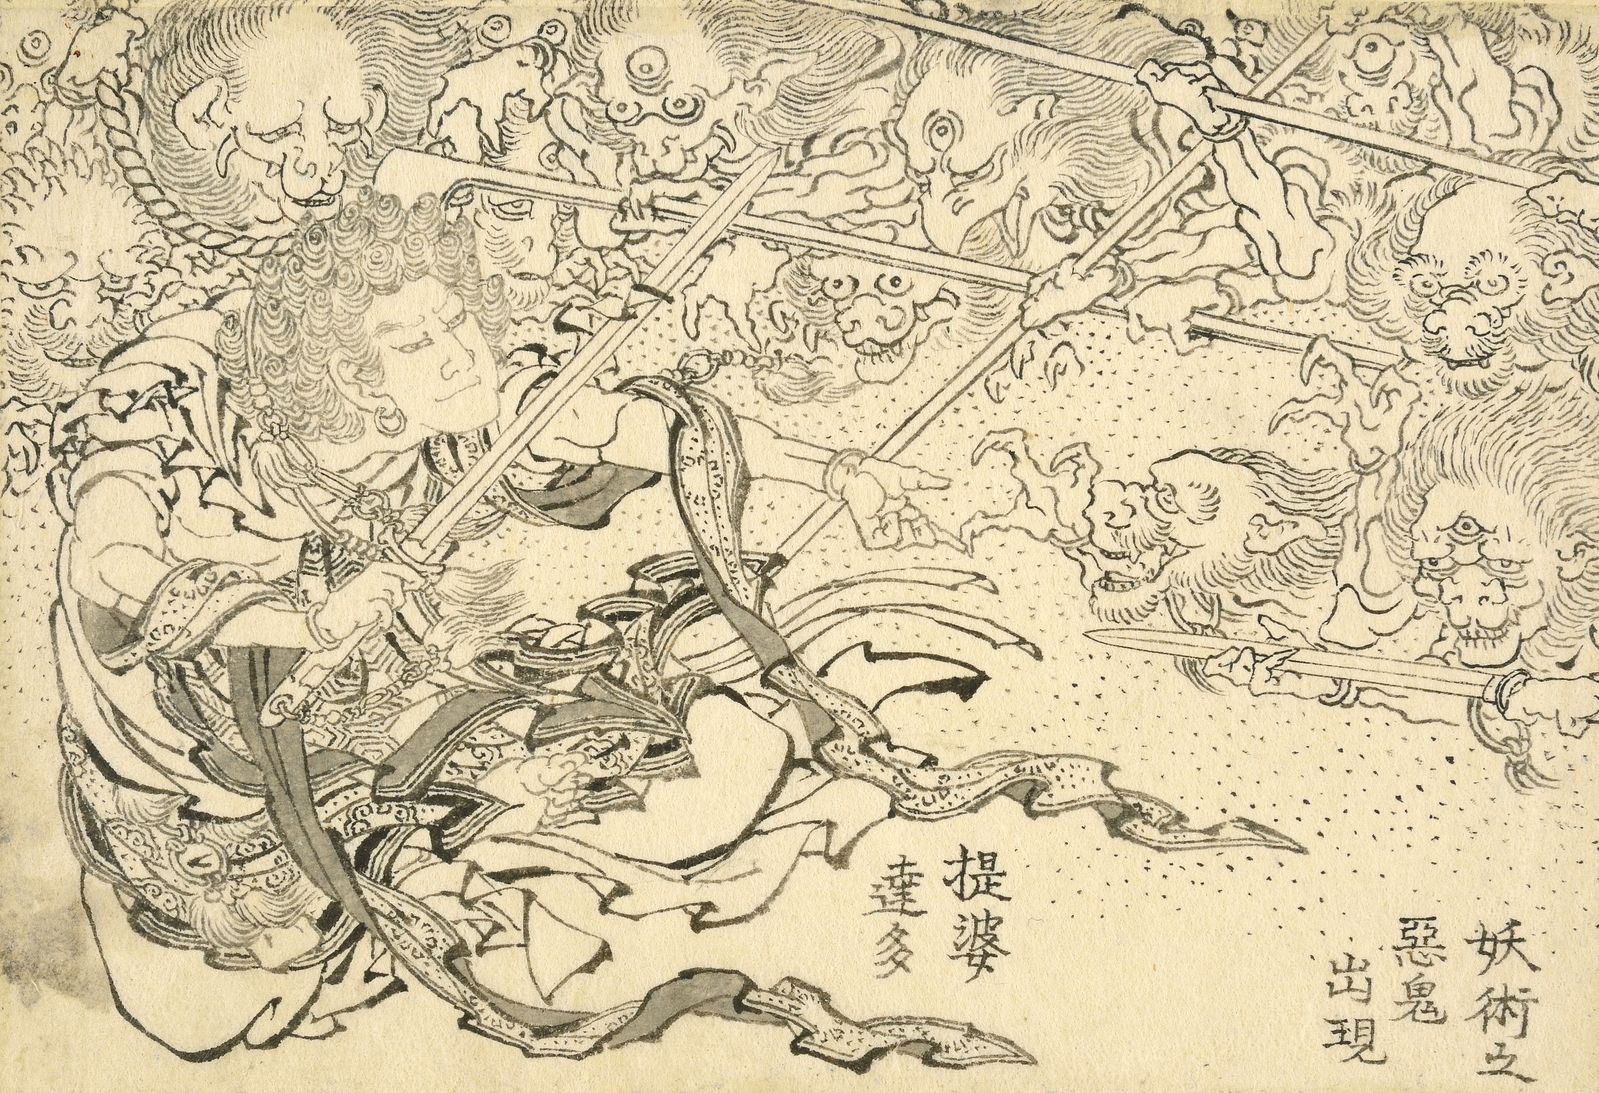 You Can Now Explore 103 'Lost' Hokusai Drawings Online